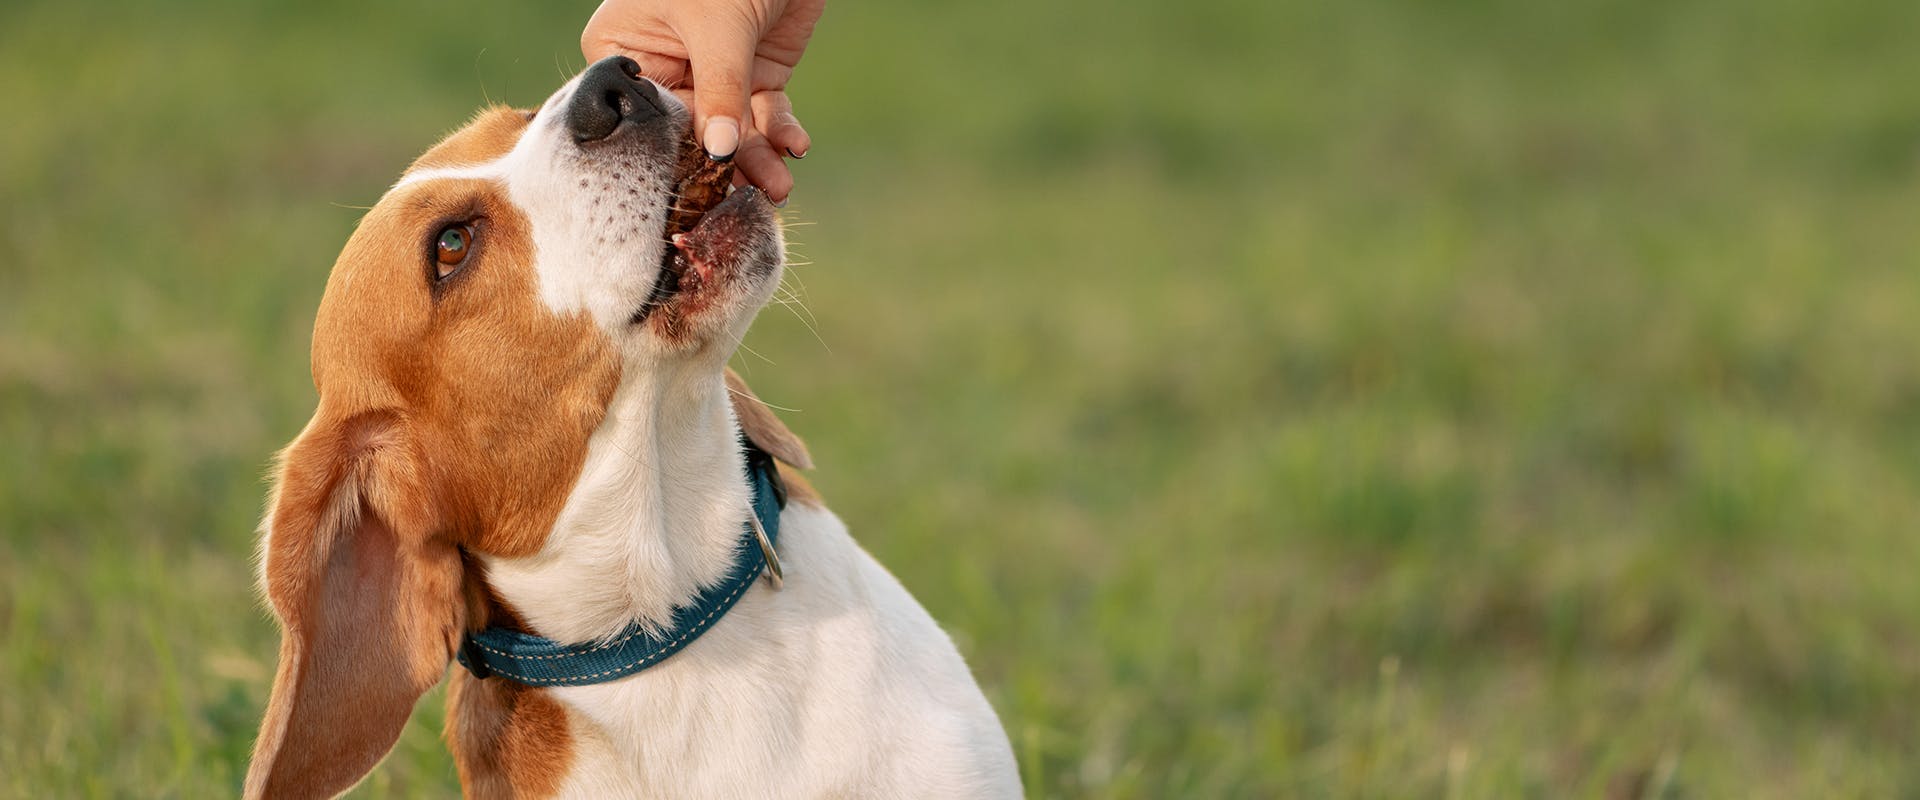 A Beagle dog, a hand coming down from above to feed it a treat